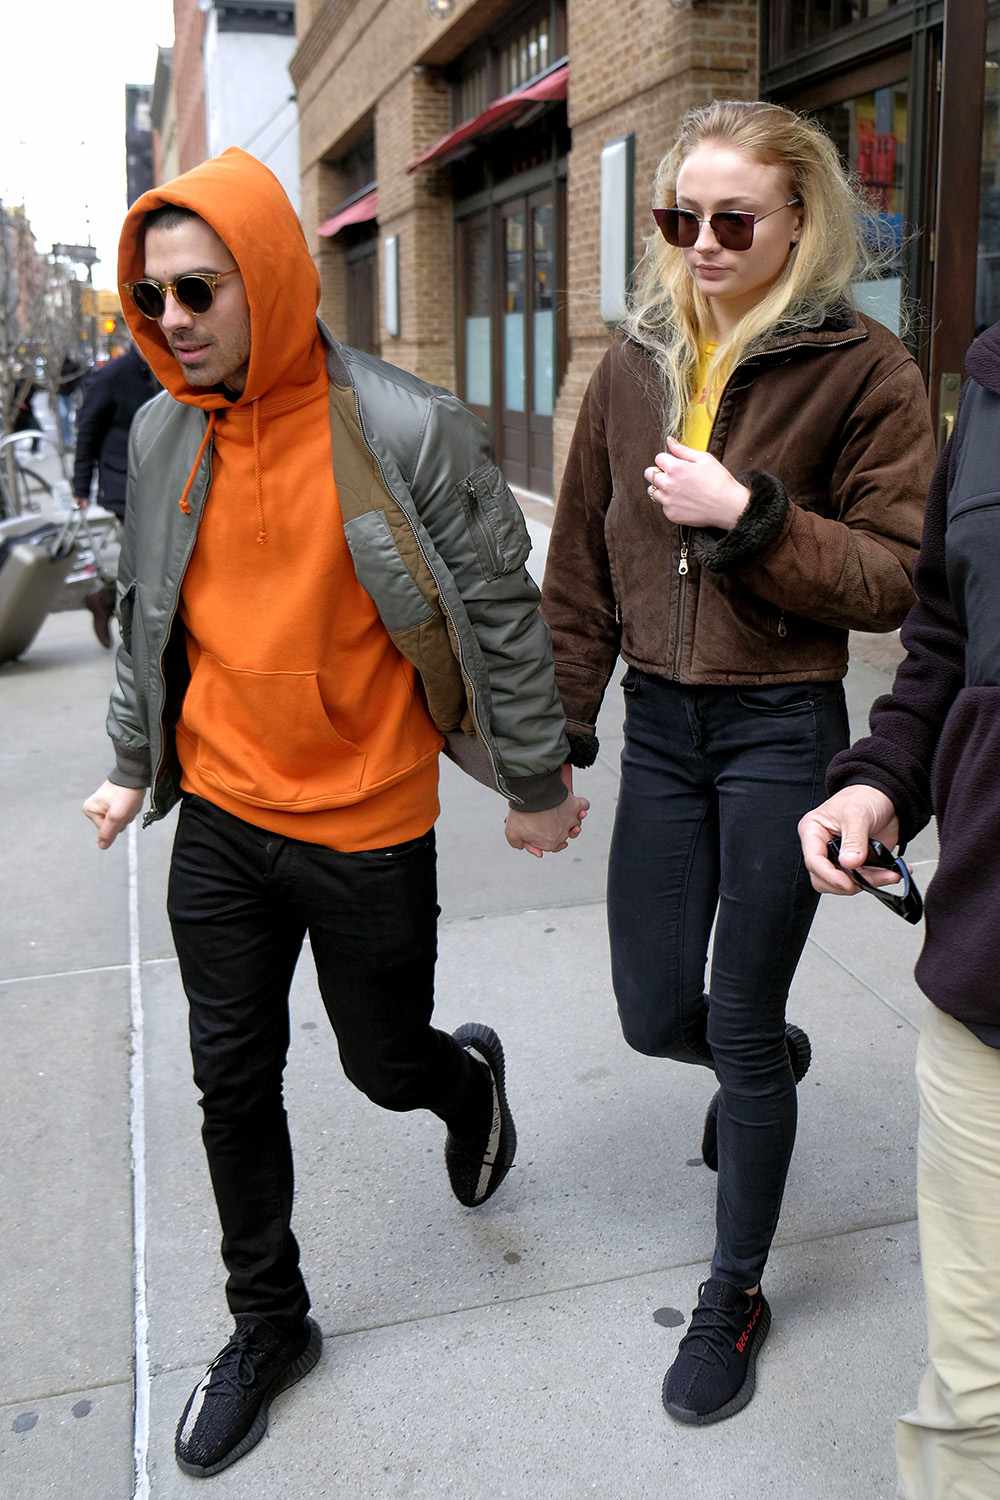 Mandatory Credit: Photo by Curtis Means/ACE Pictures/REX/Shutterstock (8467873g)                    Joe Jonas, Sophie Turner                    Joe Jonas and Sophie Turner out and about, New York, USA - 03 Mar 2017